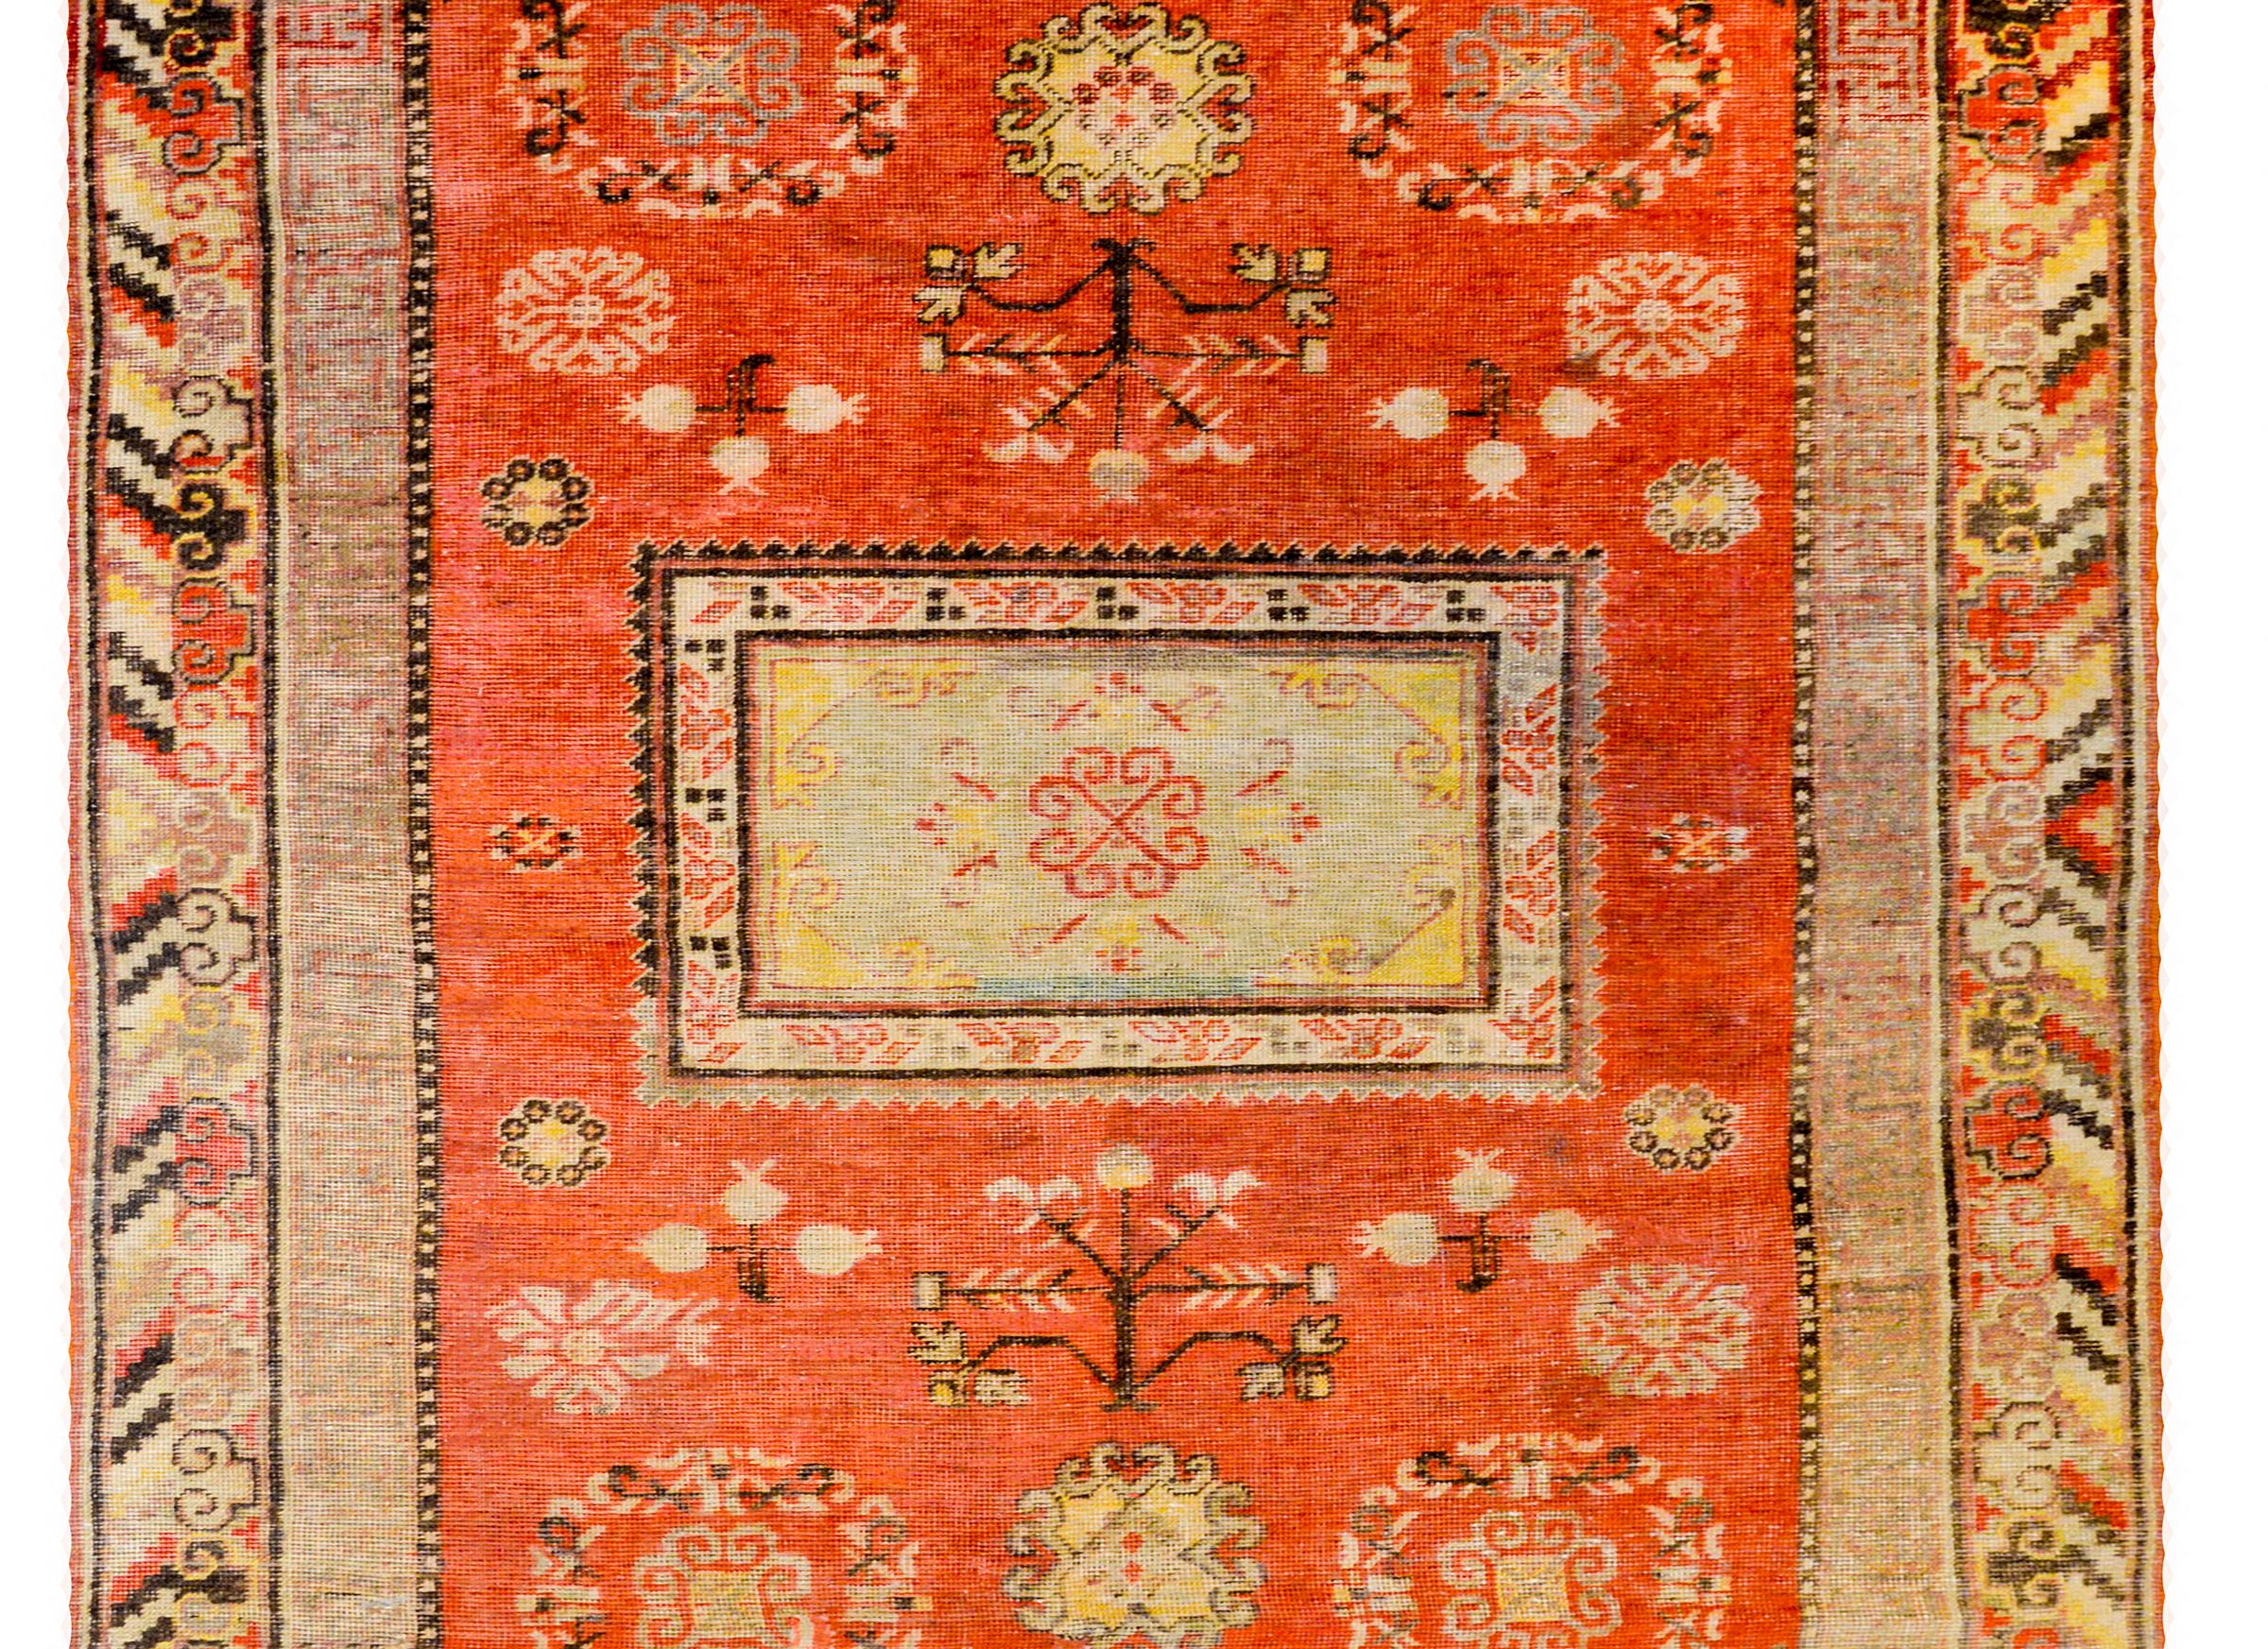 A beautiful early 20th century Central Asian Khotan rug with a large square medallion amidst a field of flowering trees-of-life, pomegranates, and stylized flowers, on a bright crimson field. The border is complementary with an inner meandering